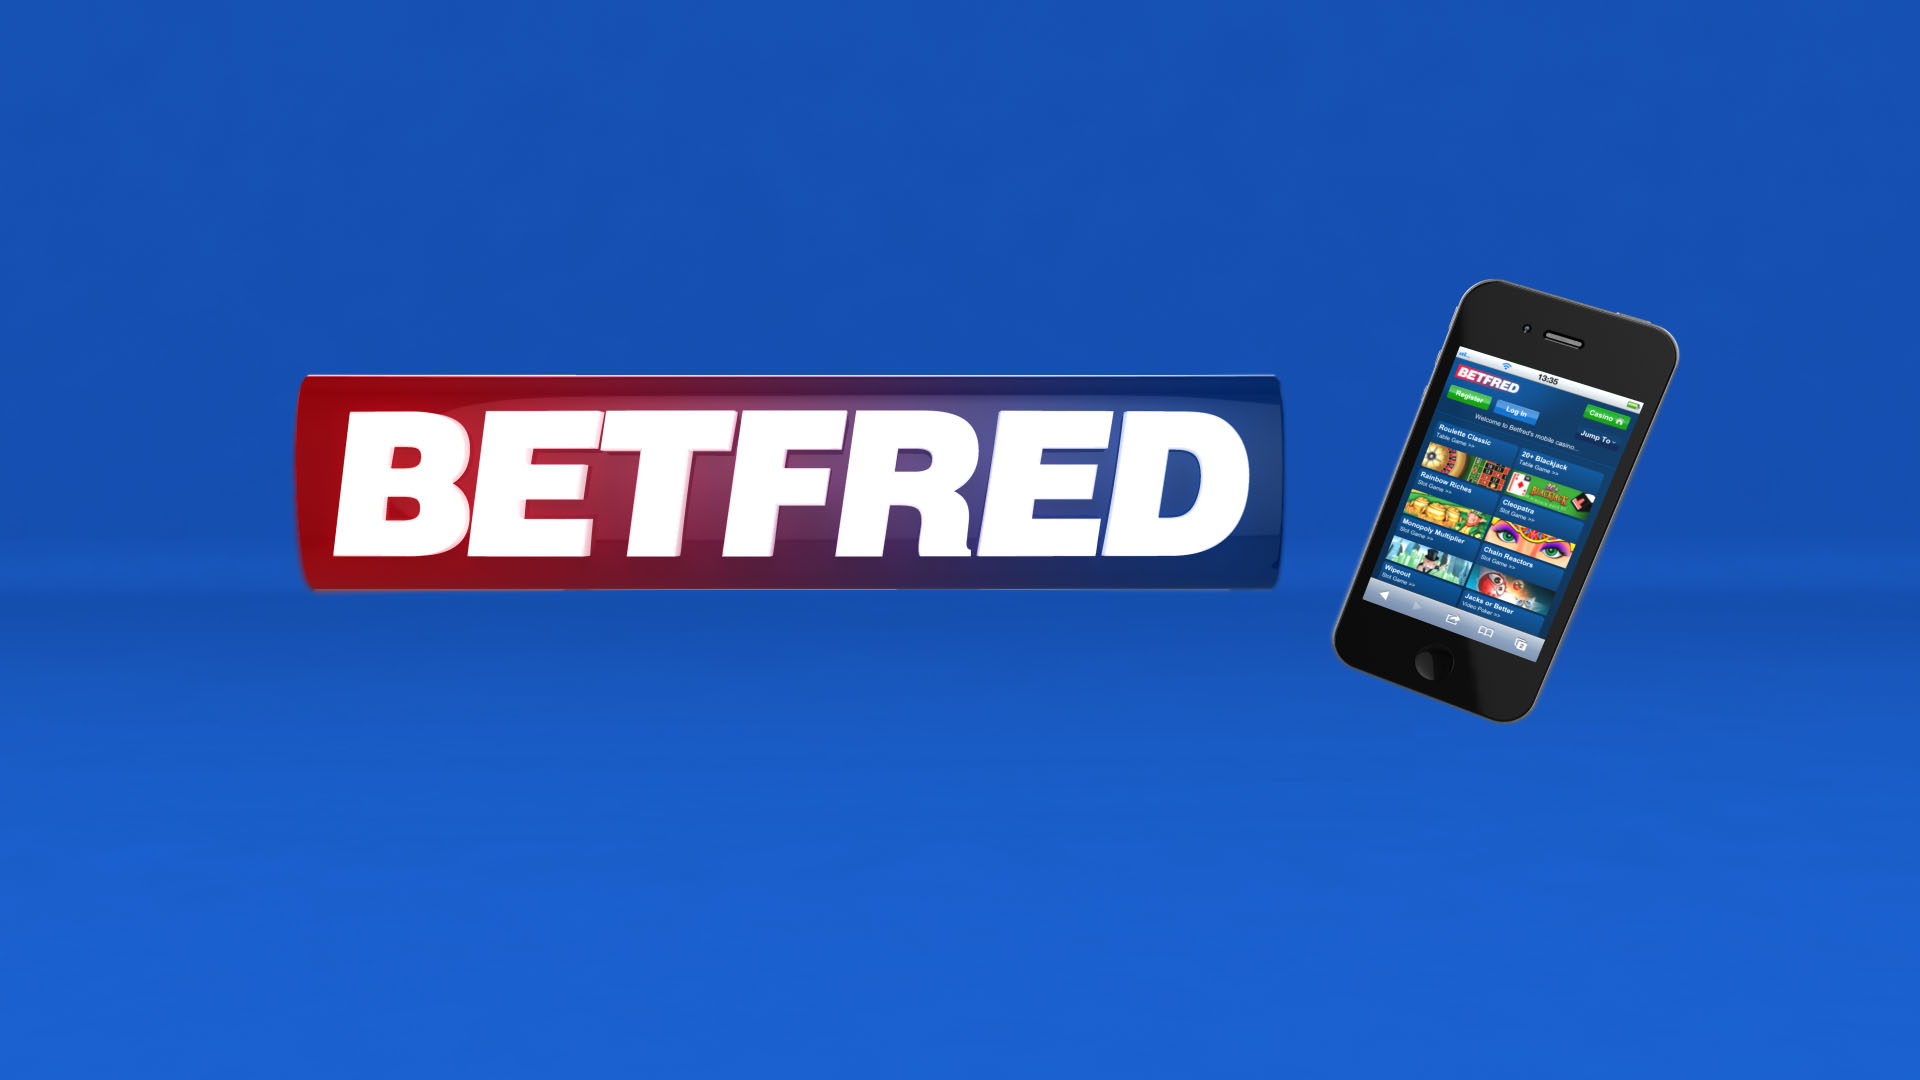 Betfred Casino Review